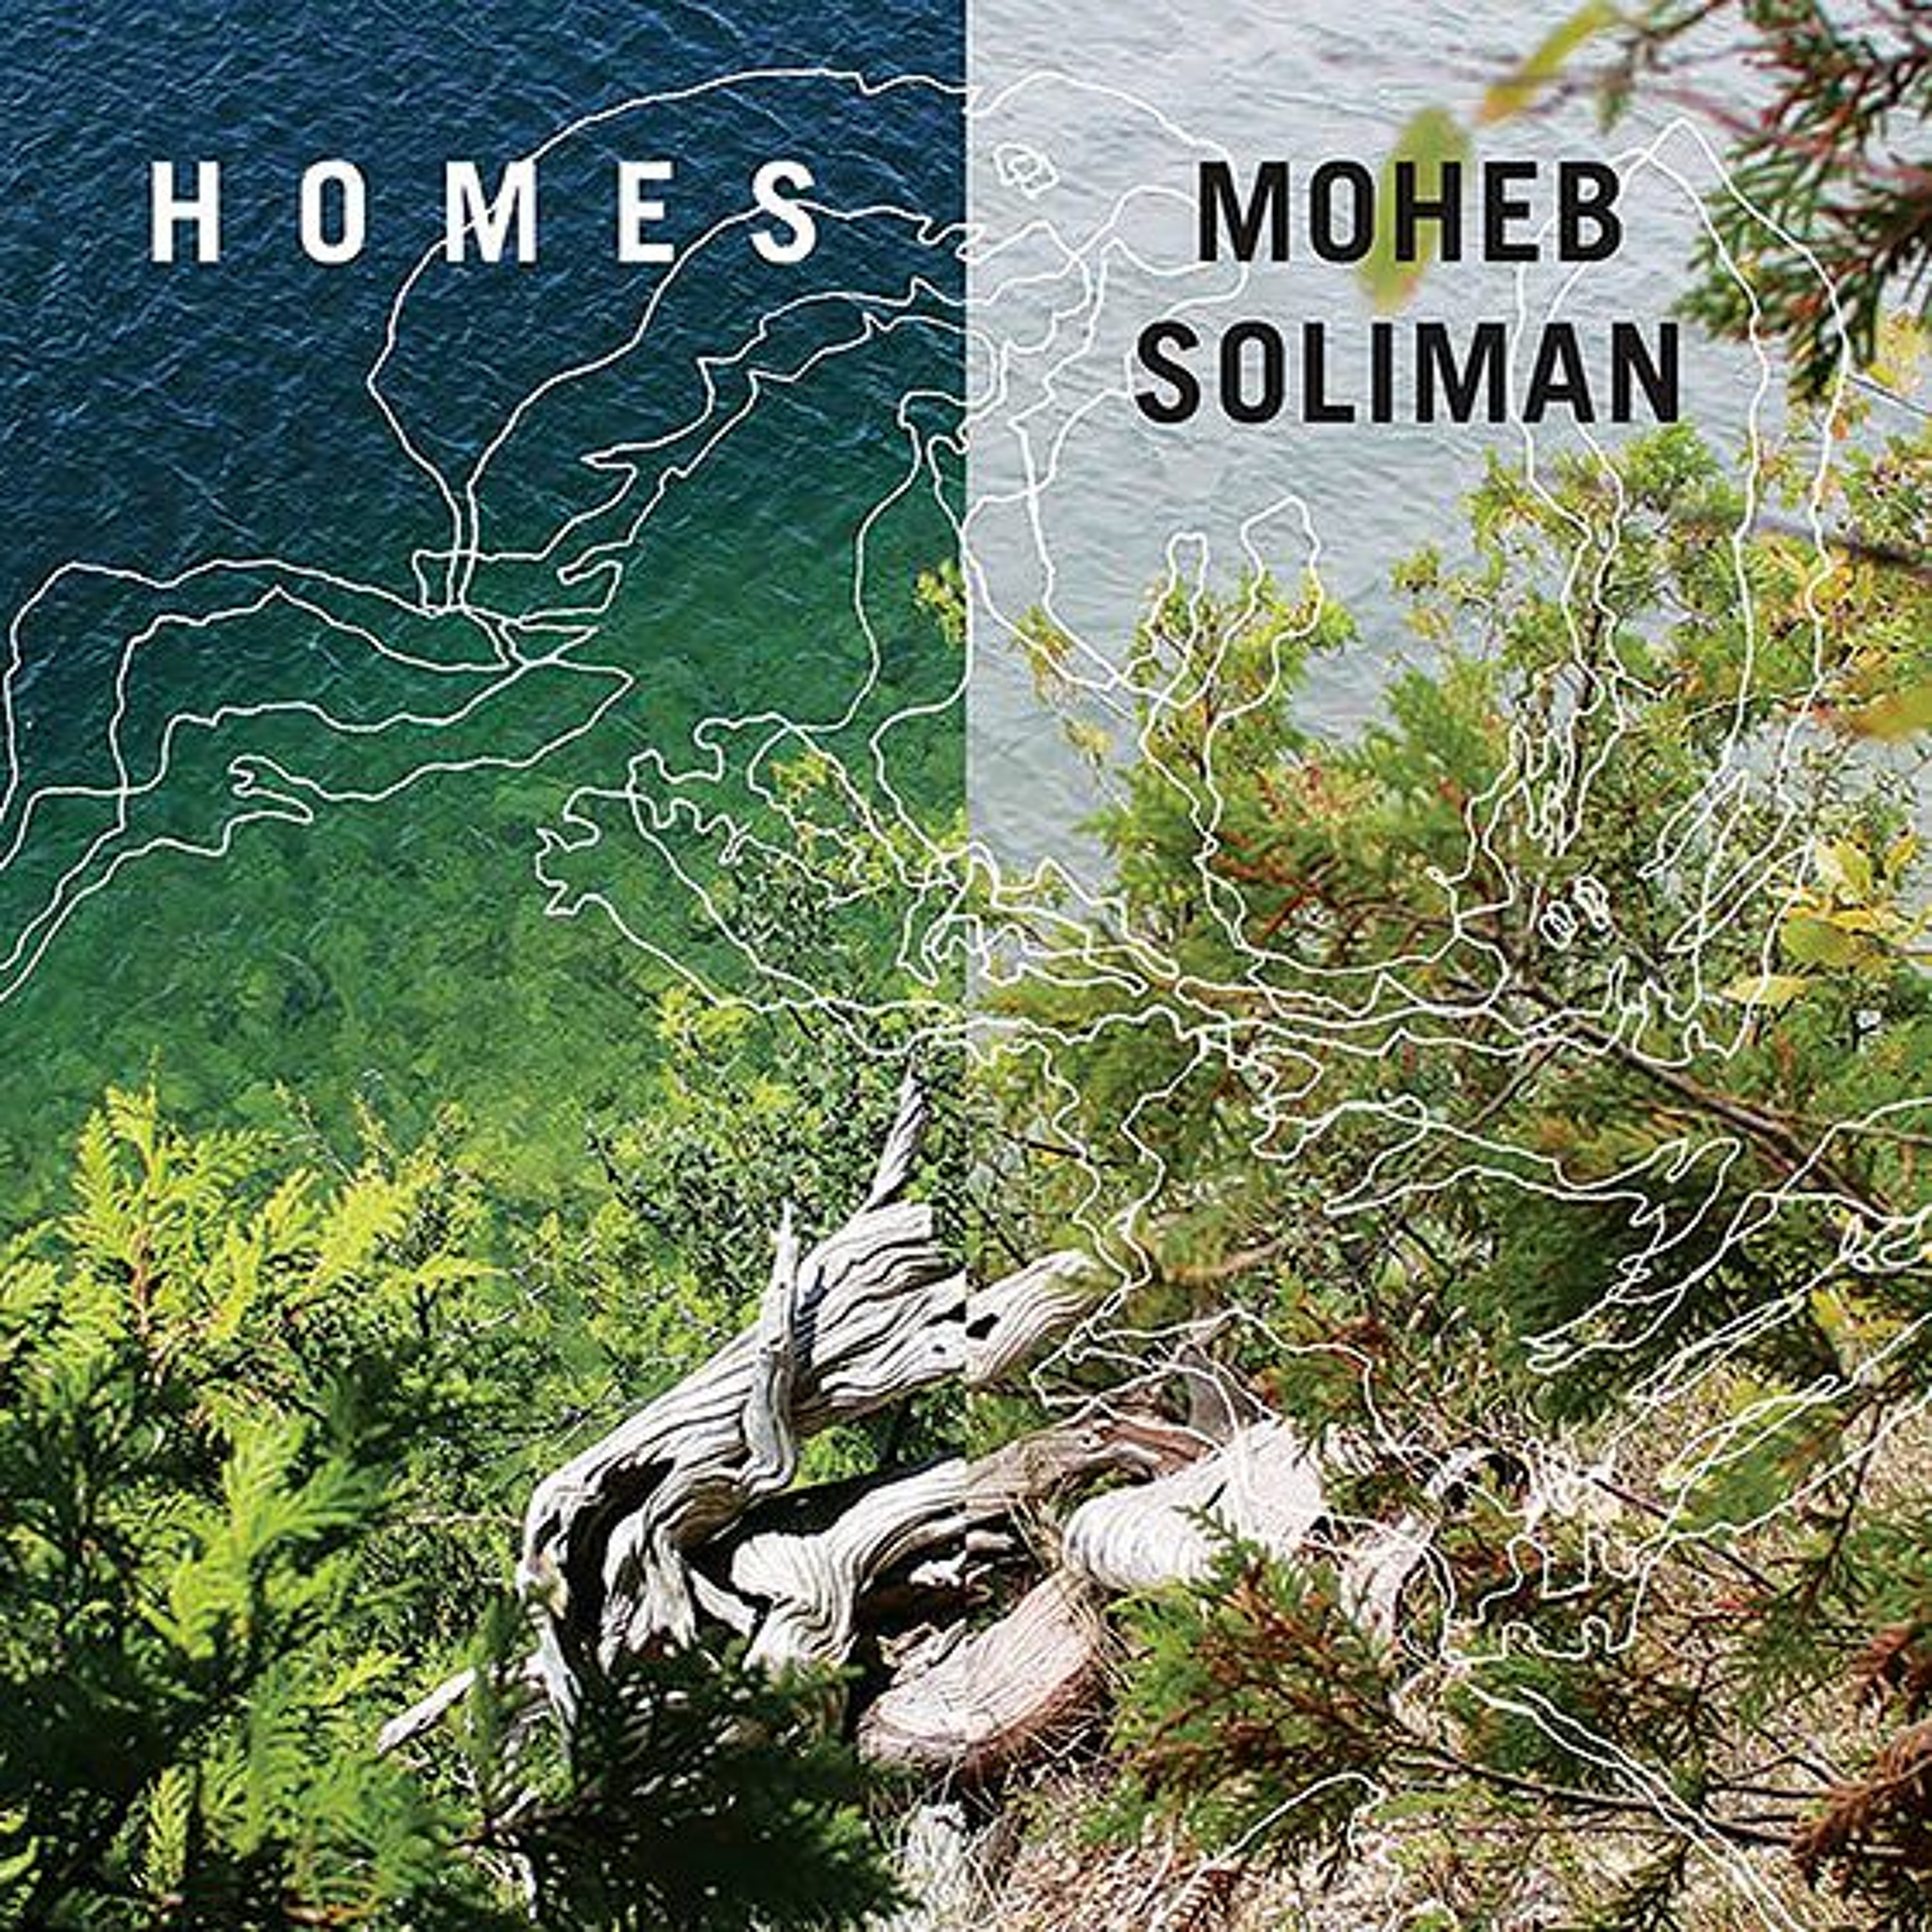 Homes by Moheb Soliman